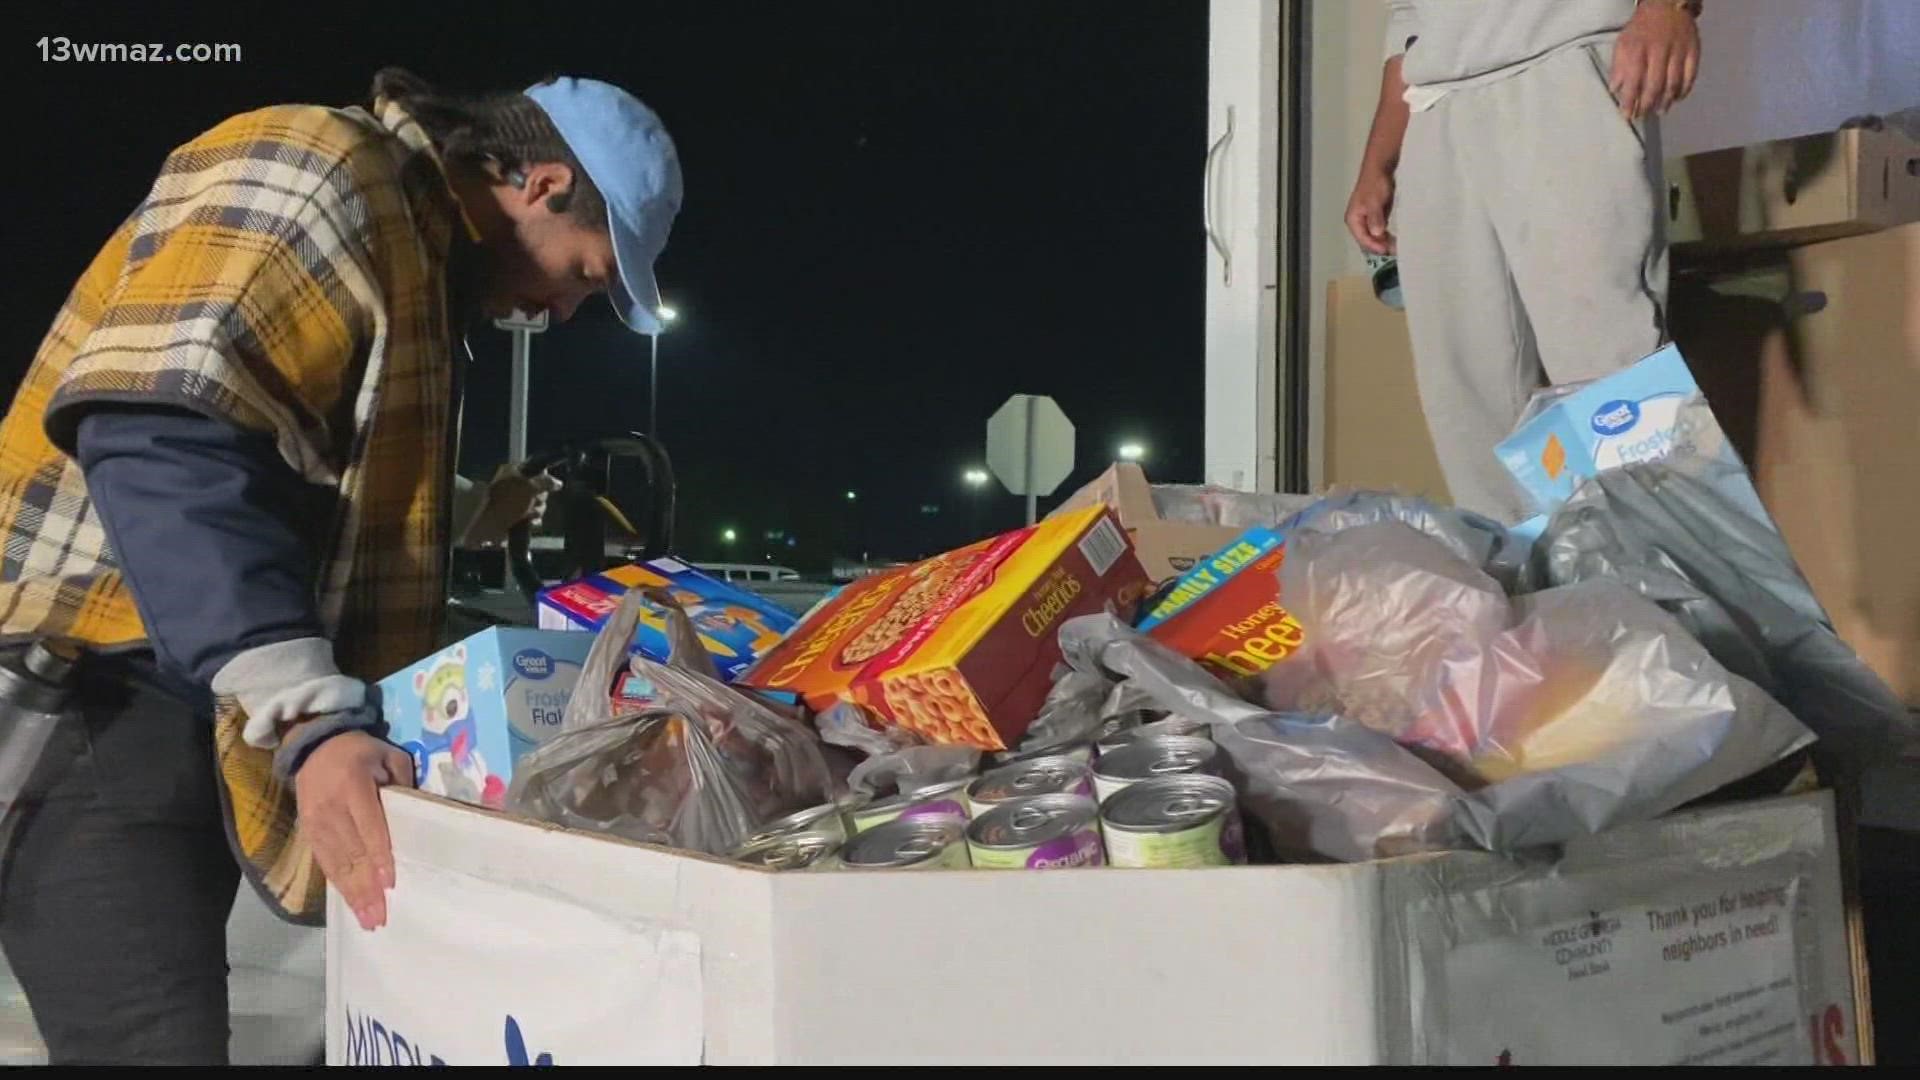 Folks across Central Georgia had a chance to donate nonperishable food at two Walmart locations in Macon and Warner Robins.